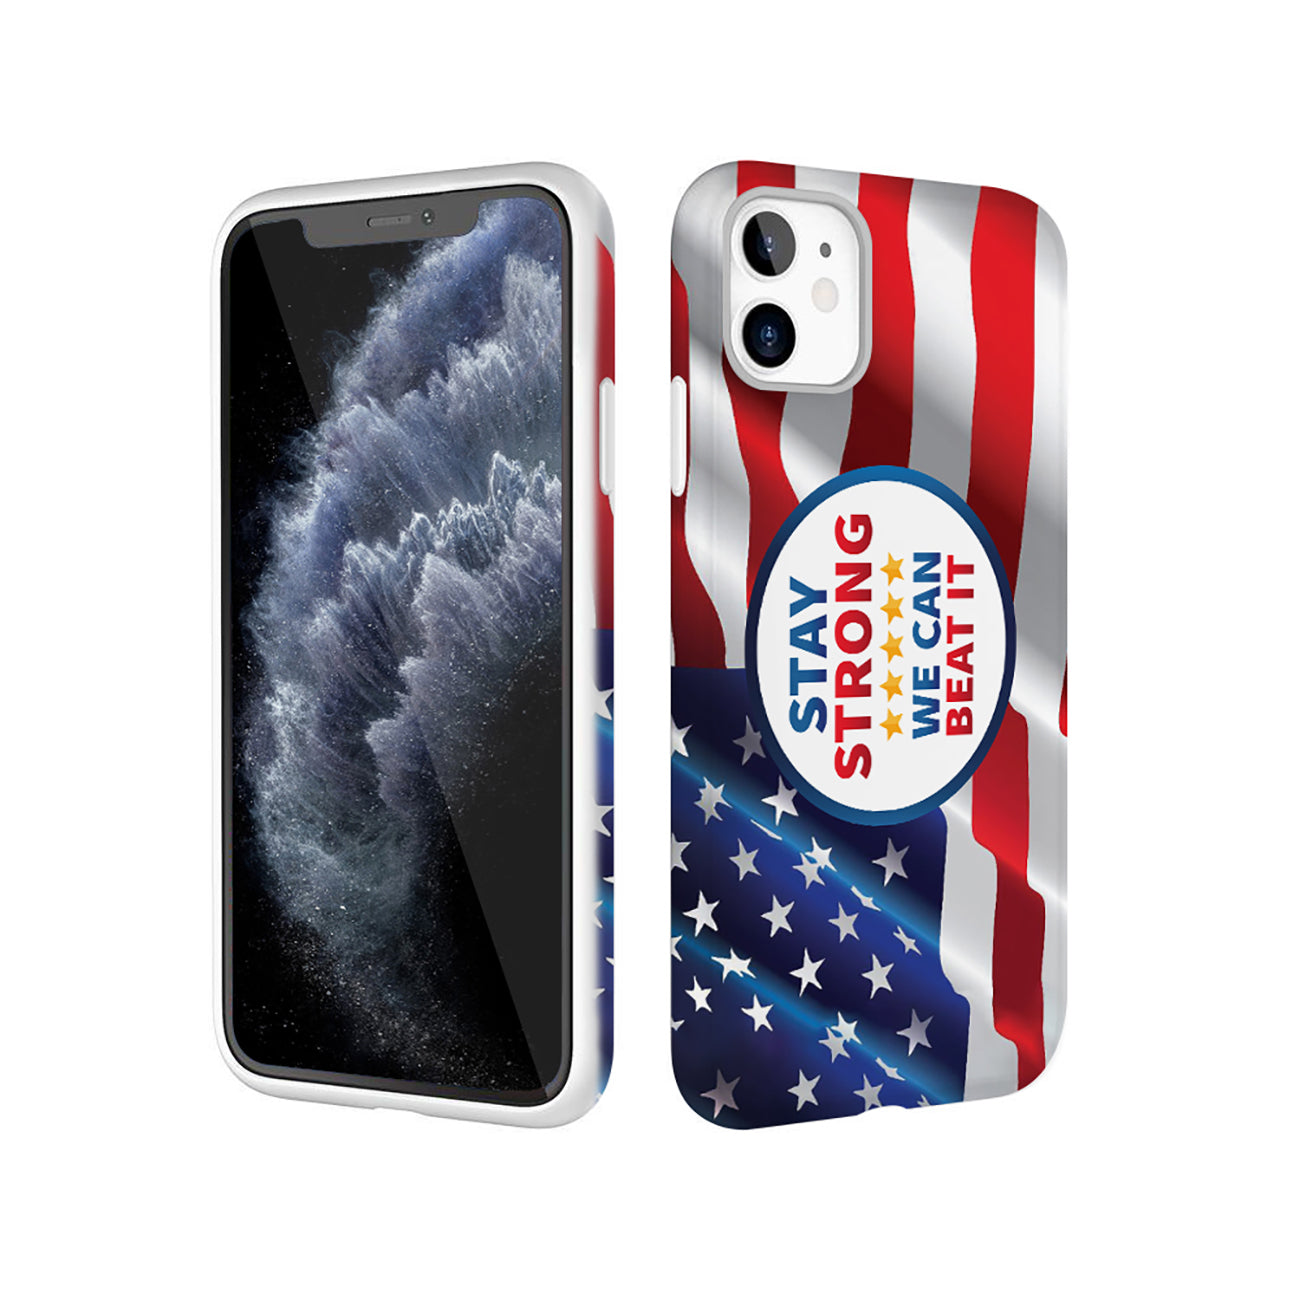 Eagle Design Case For APPLE IPHONE 11 PRO MAX In Mix